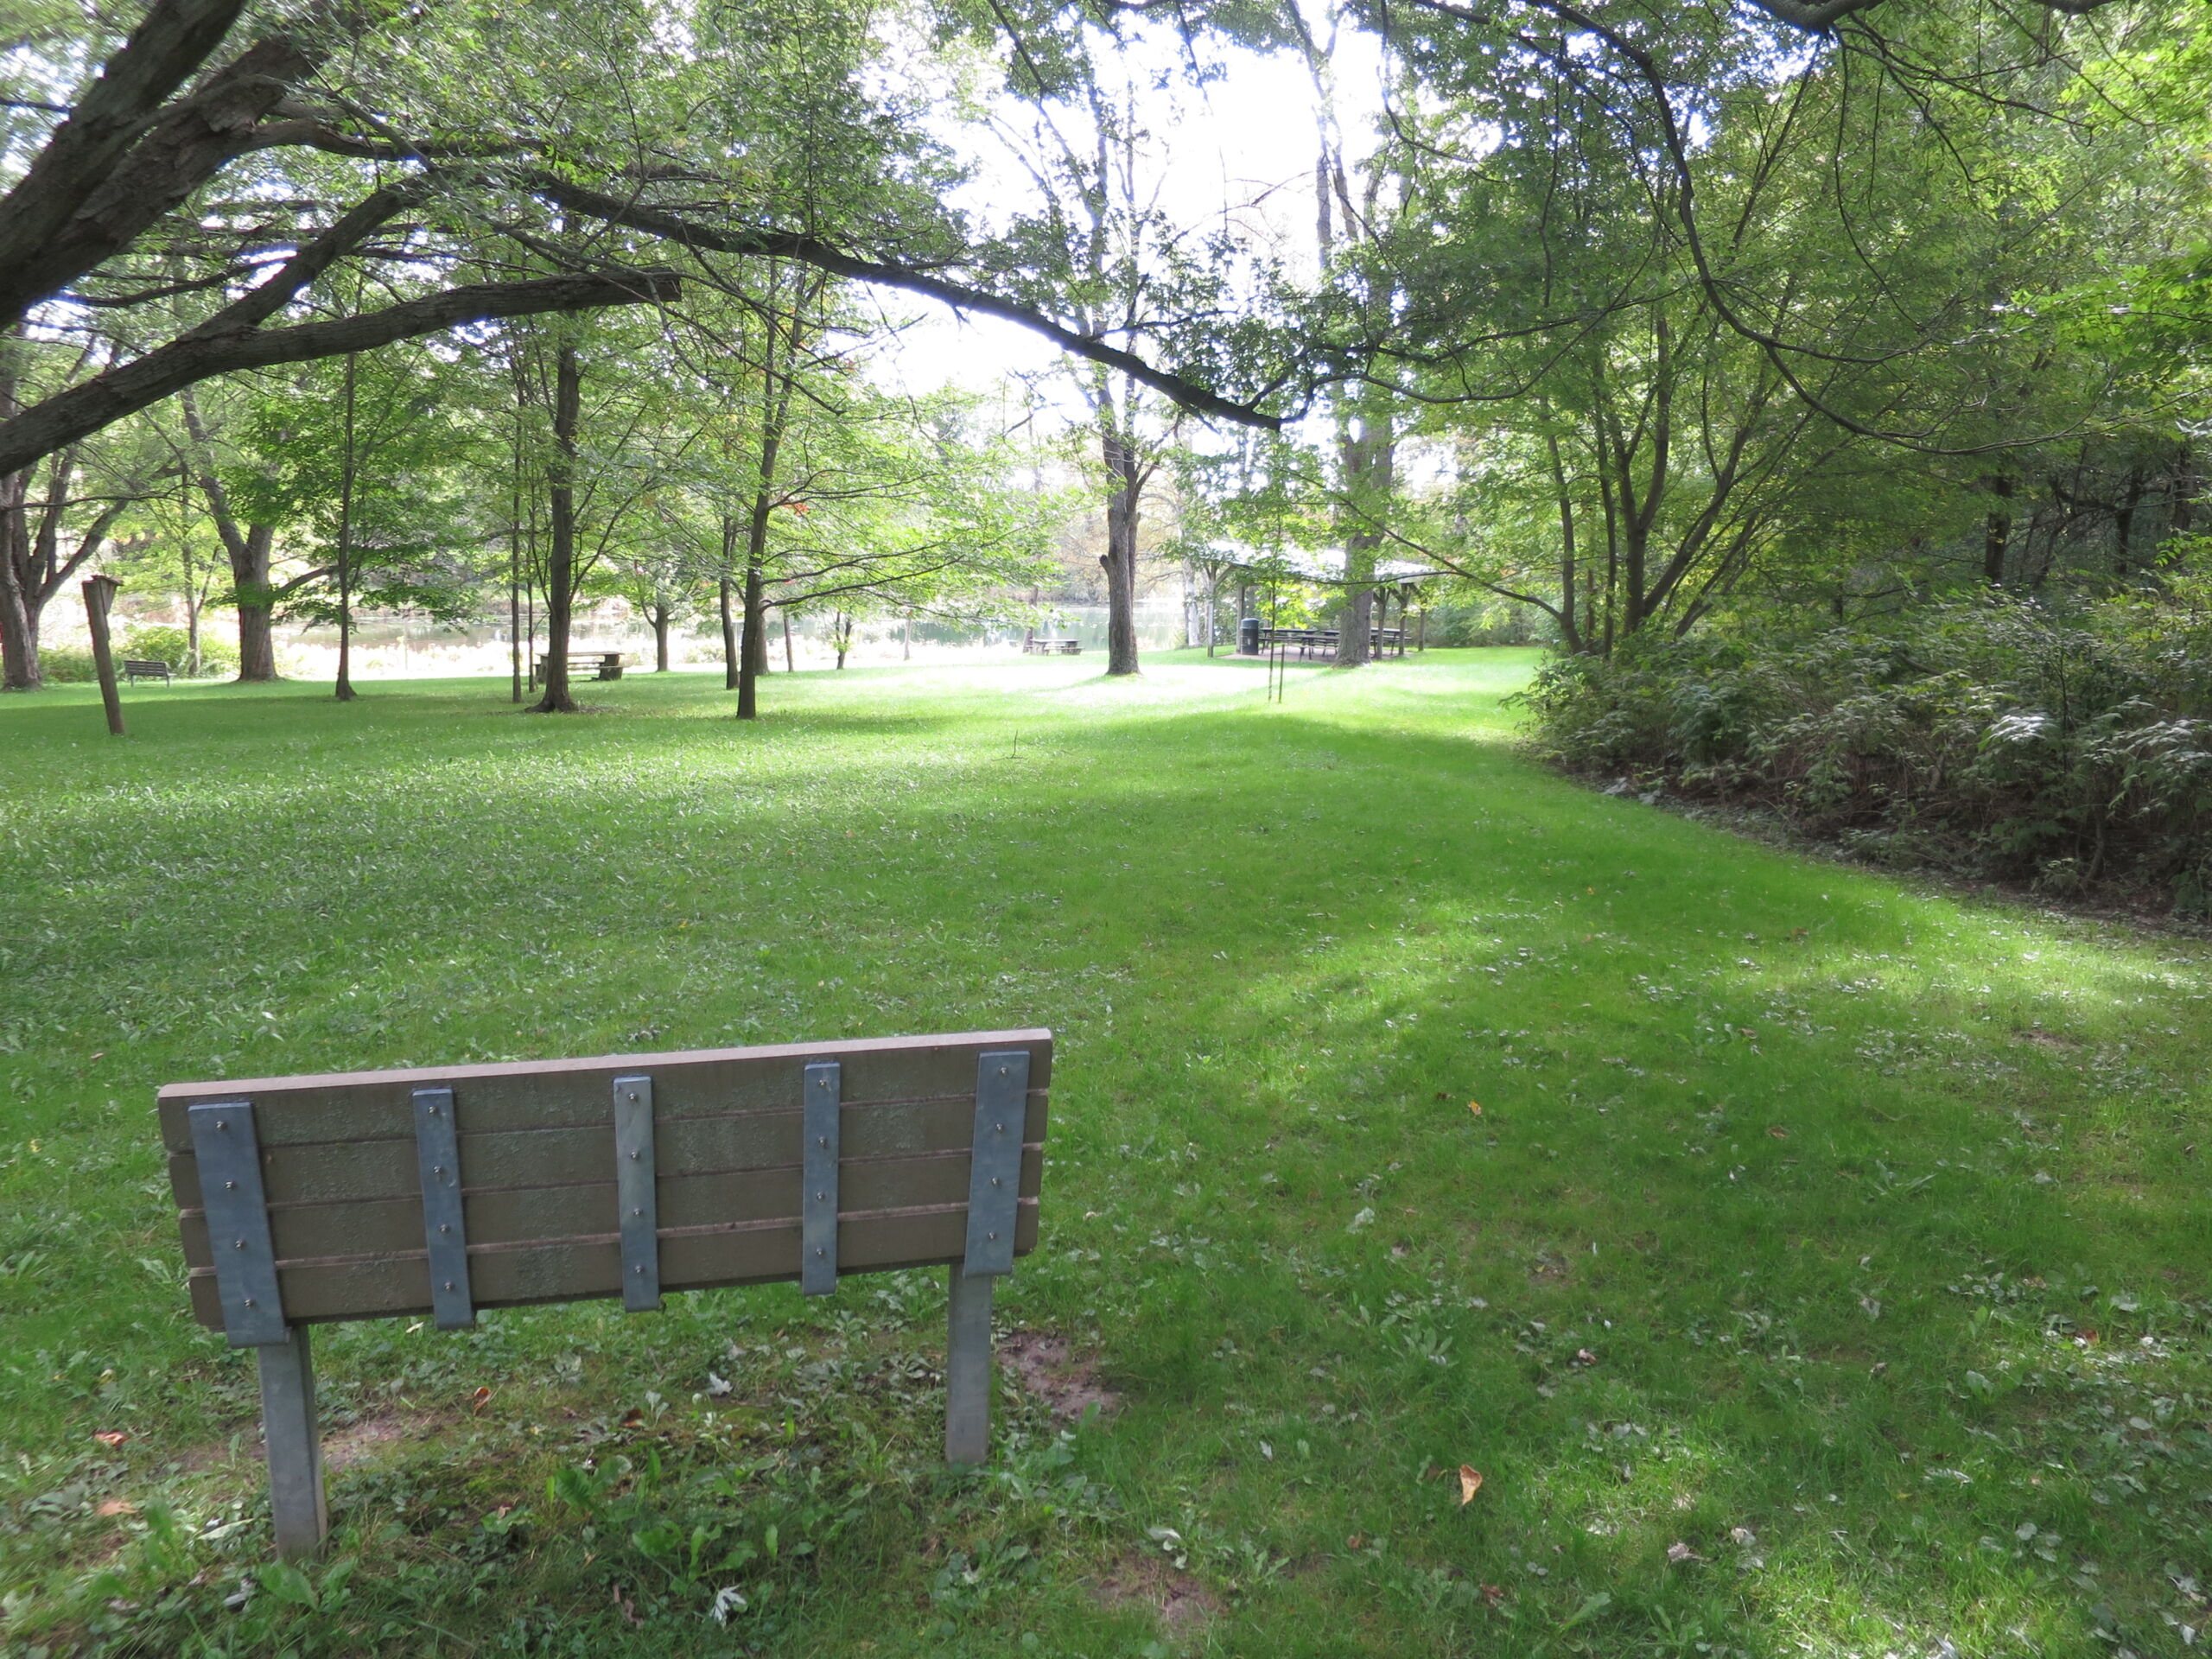 A park bench in a grassy field.